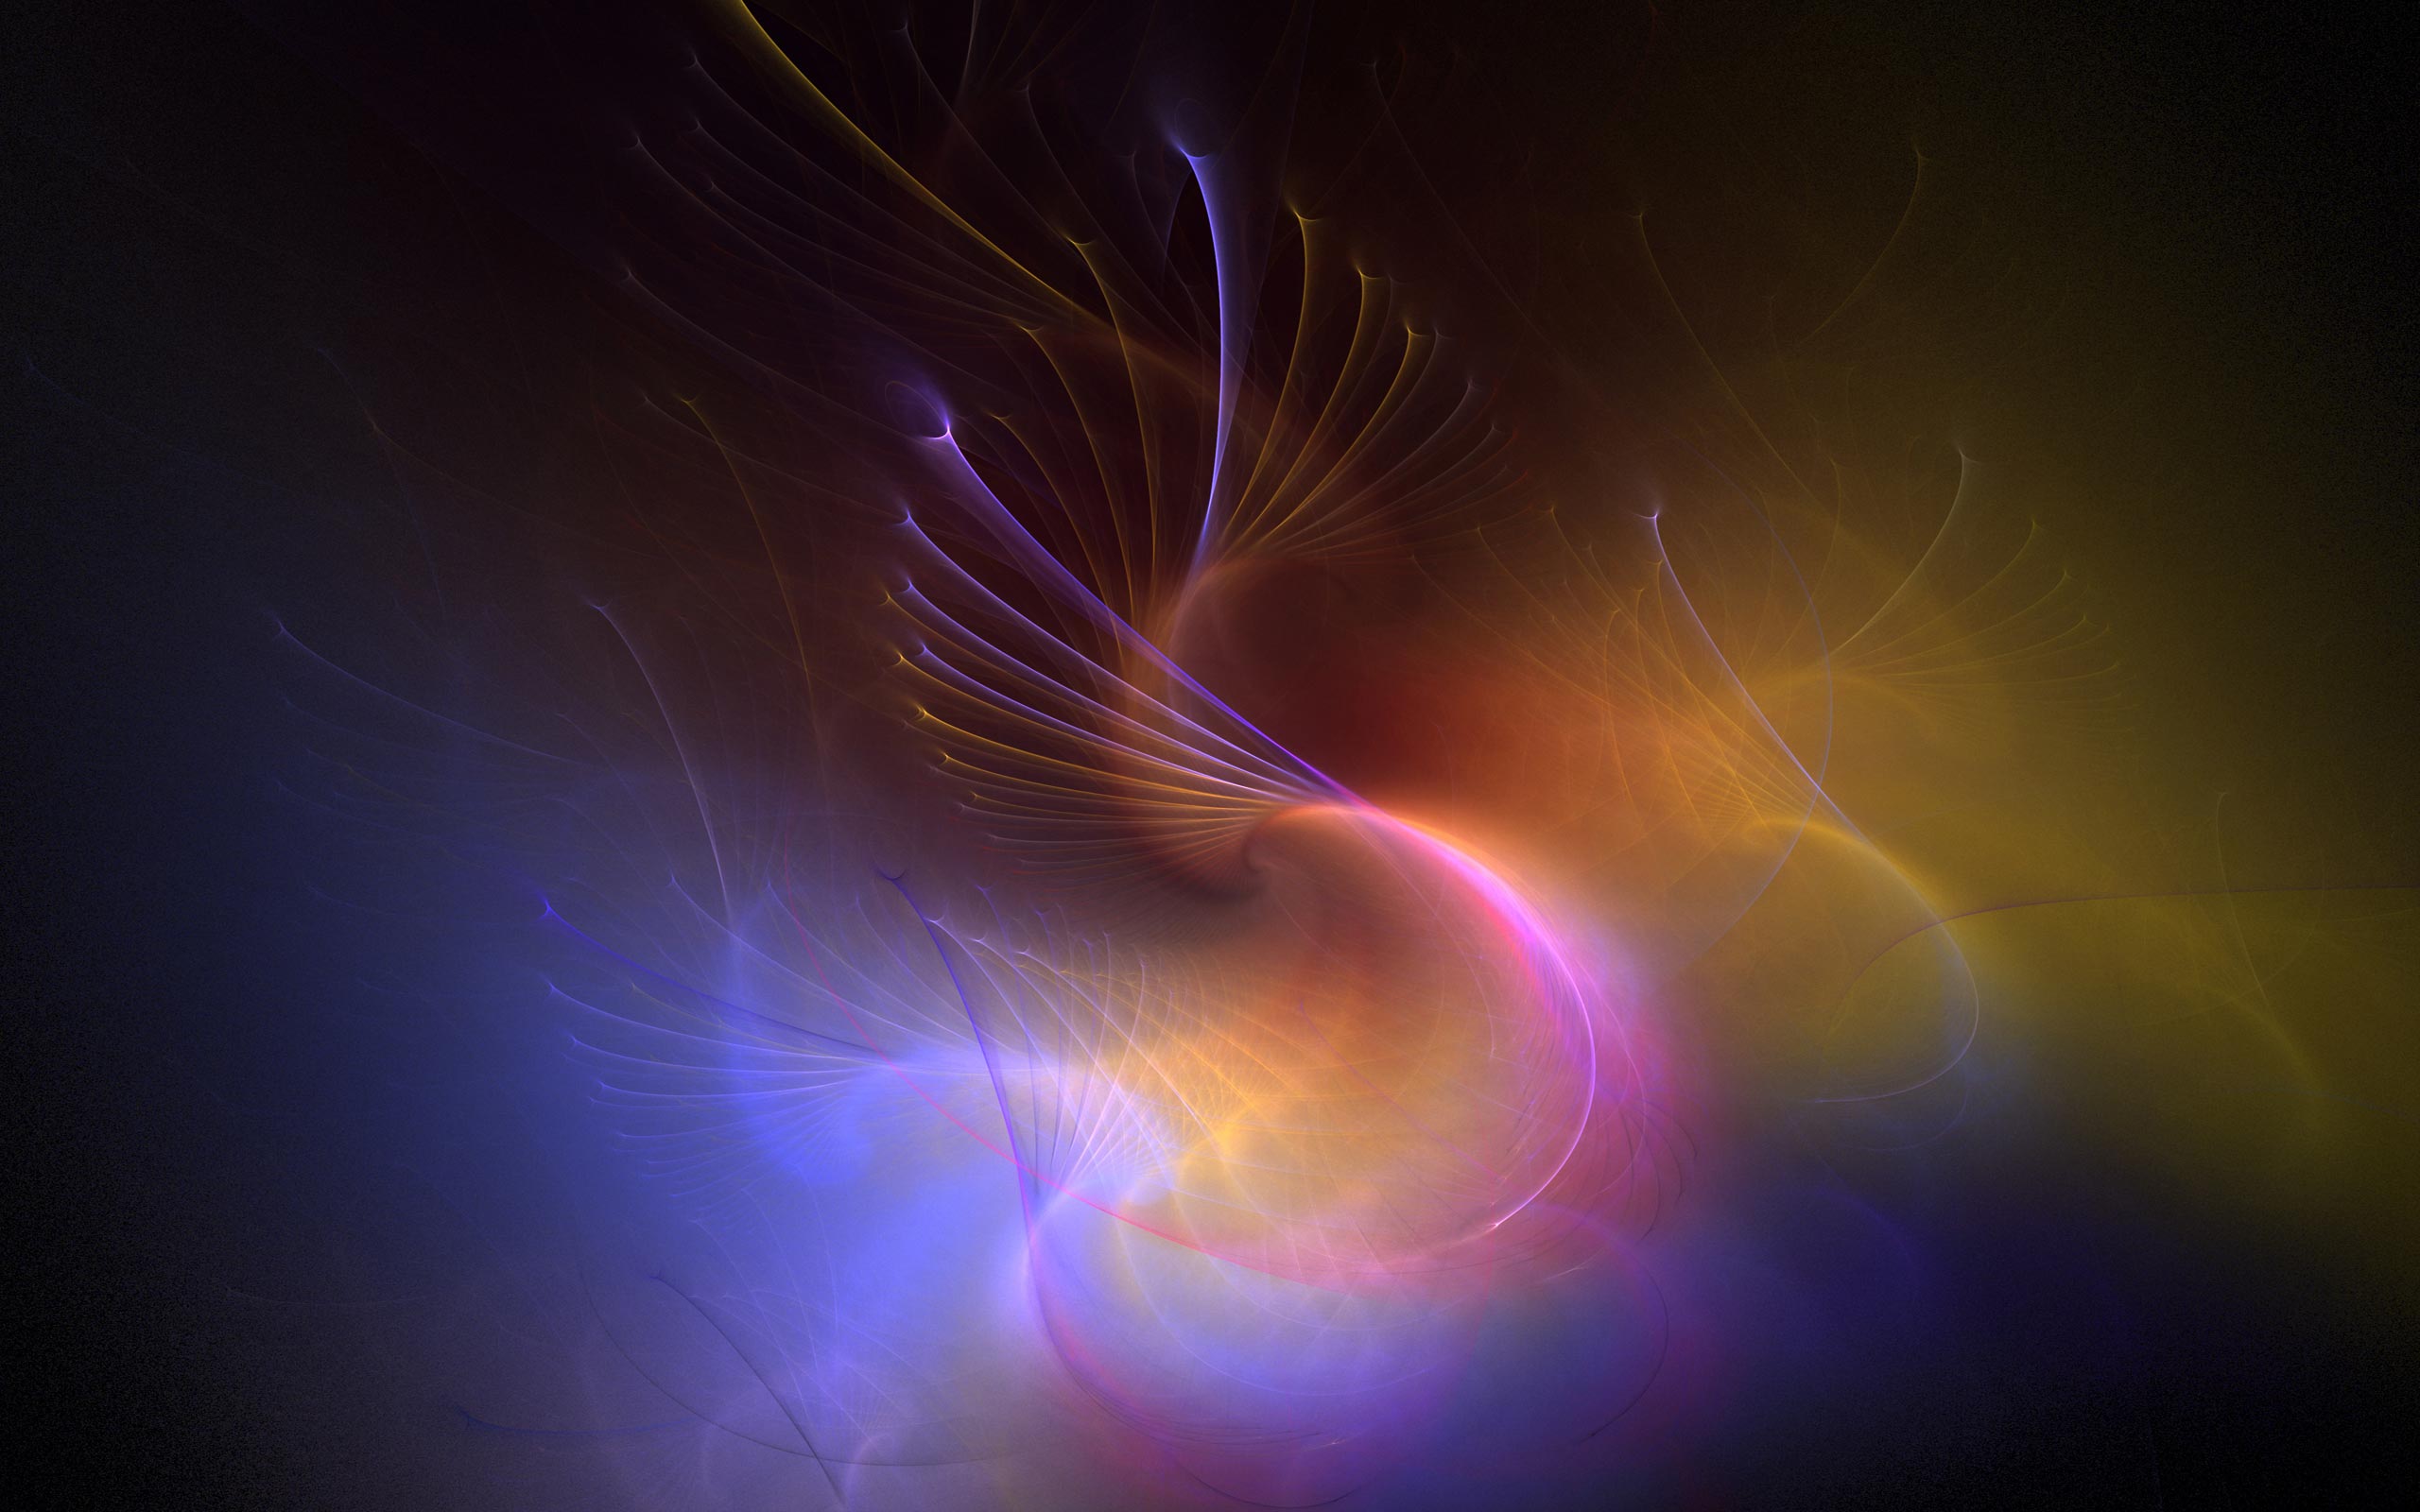  Abstract Desktop Backgrounds HD Wallpapers Art Images colorful 2560x1600